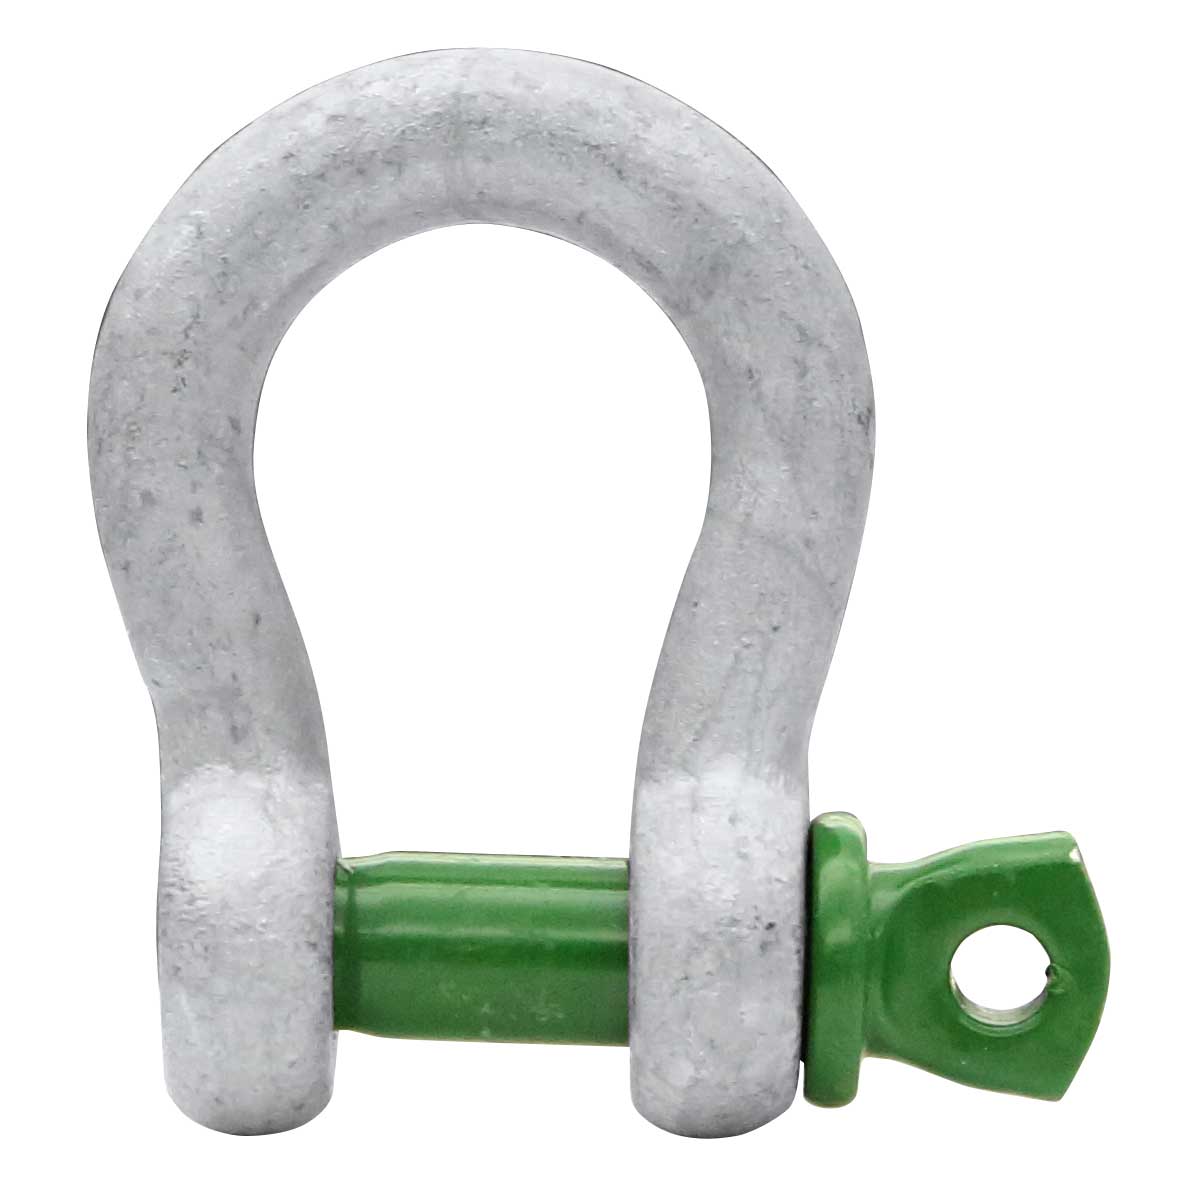 3/8" Van Beest Green Pin® Screw Pin Anchor Shackle | G-4161 - 1 Ton primary image